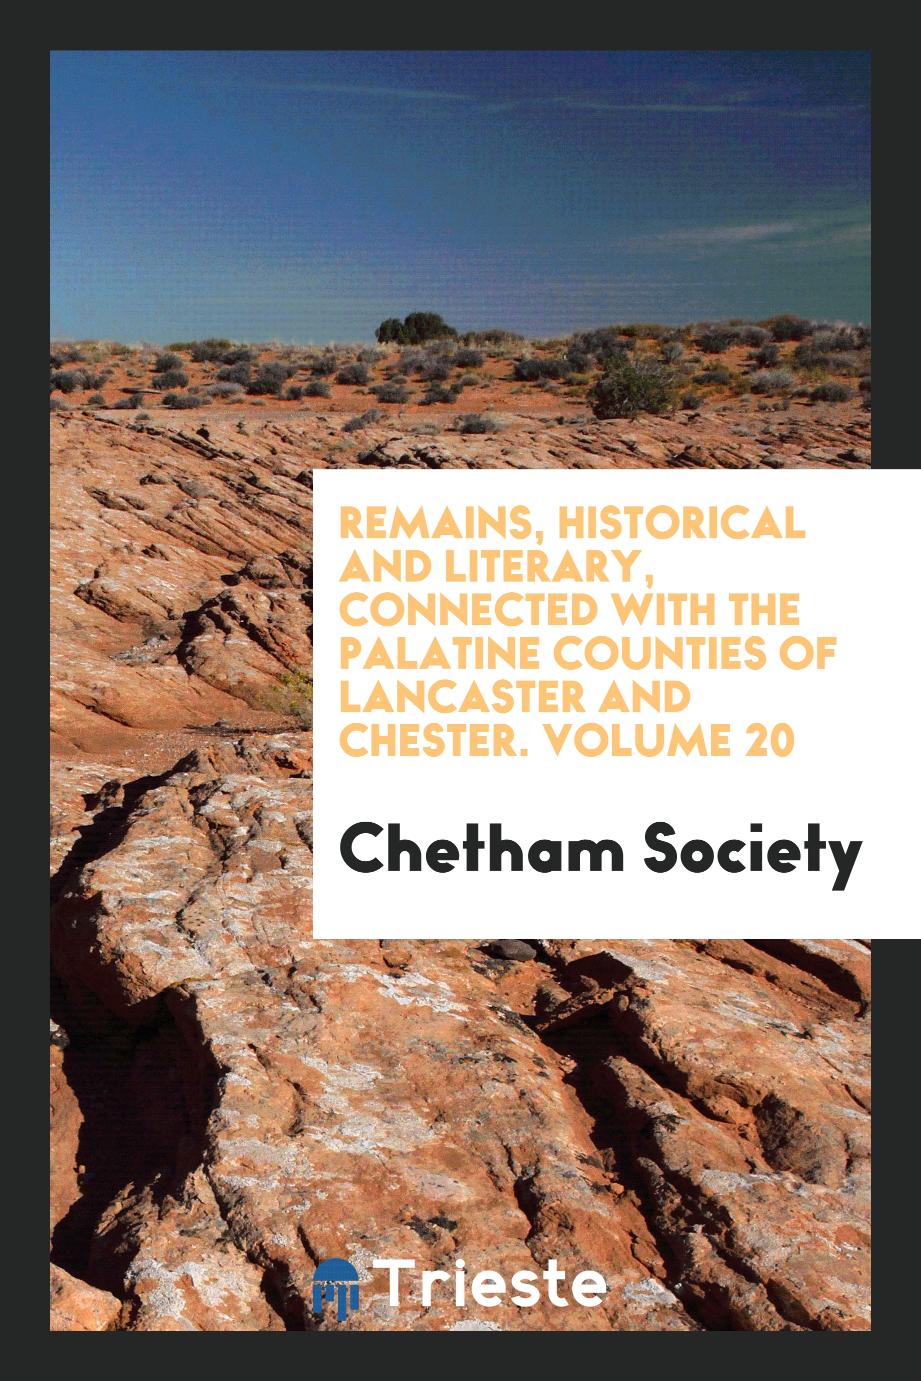 Remains, Historical and Literary, Connected with the Palatine Counties of Lancaster and Chester. Volume 20